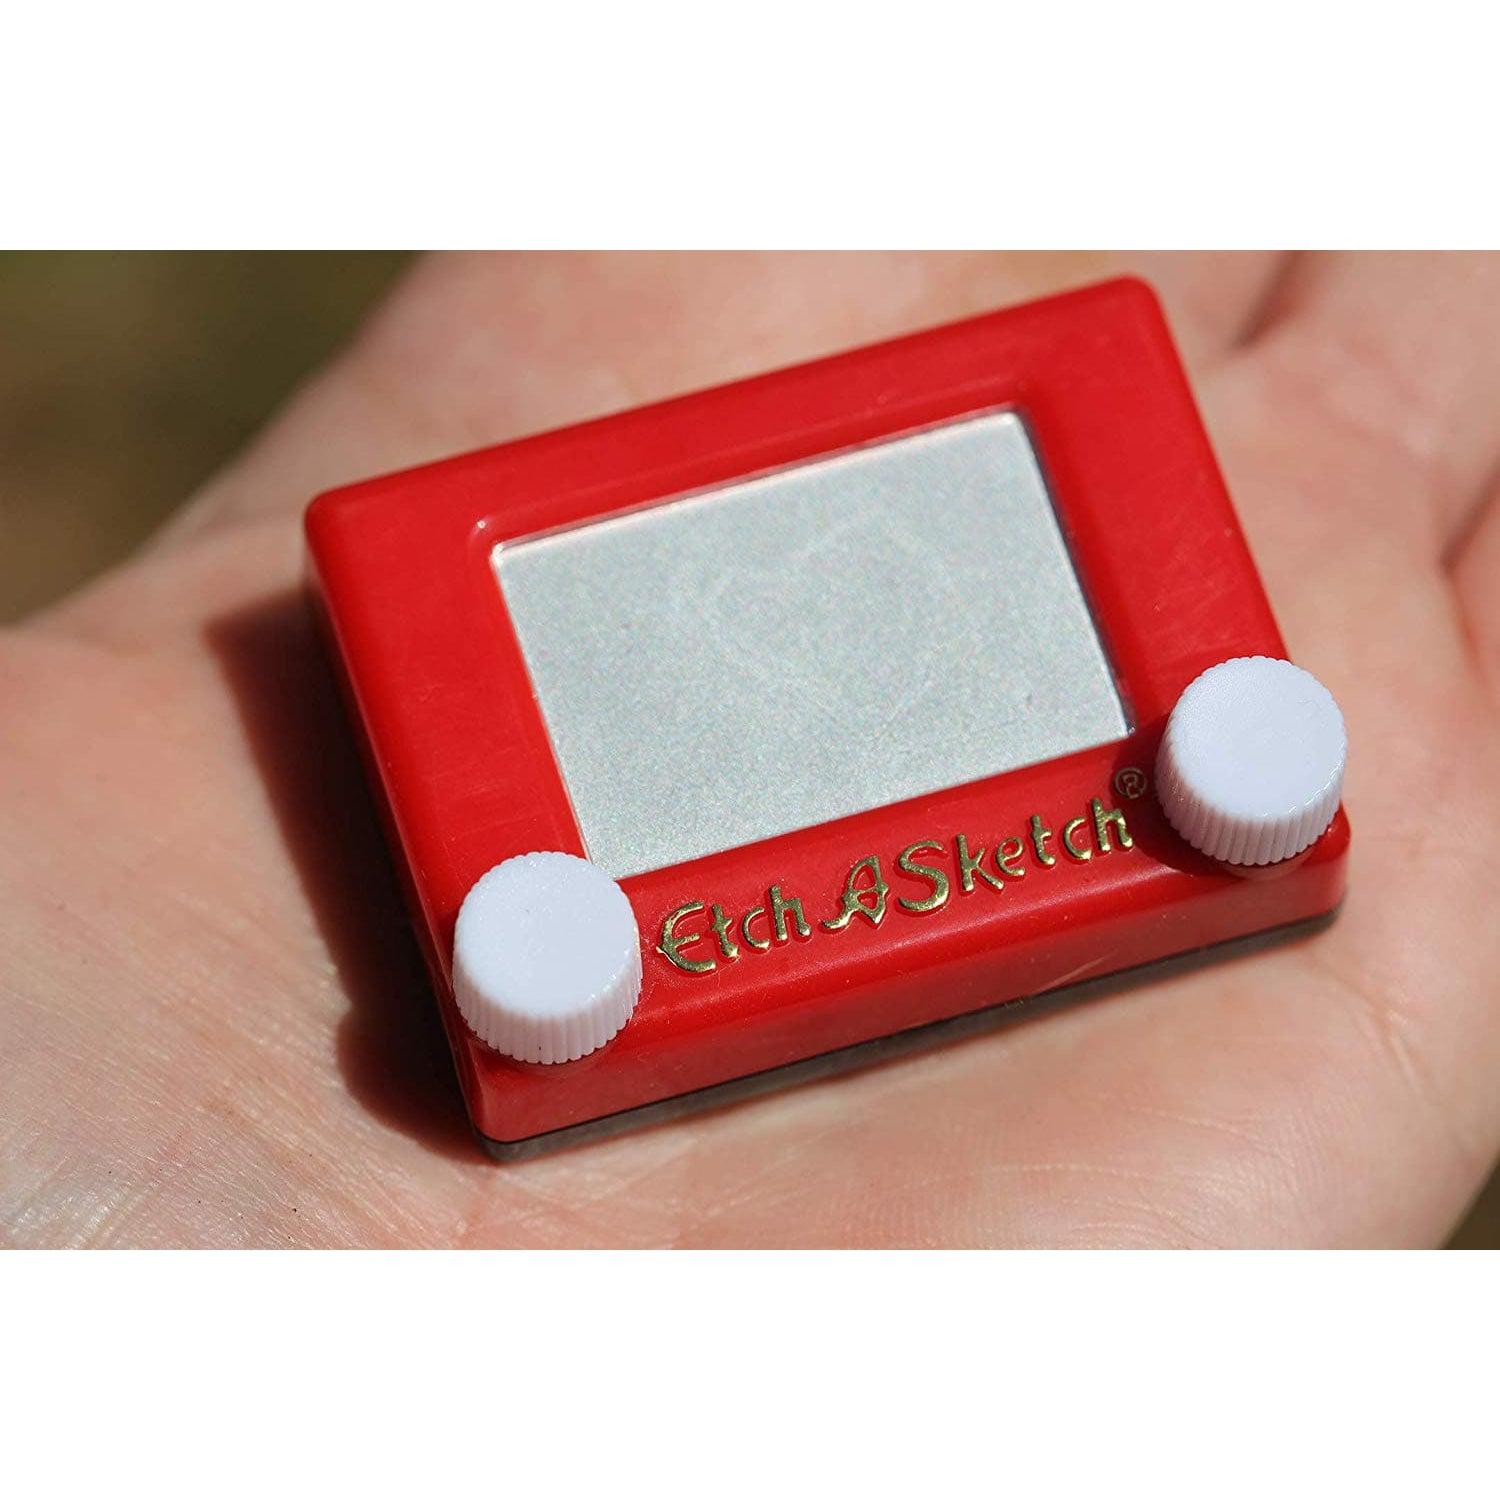 Pocket Etch-A-Sketch Mini Size Drawing Toy by Spin Master (Red)